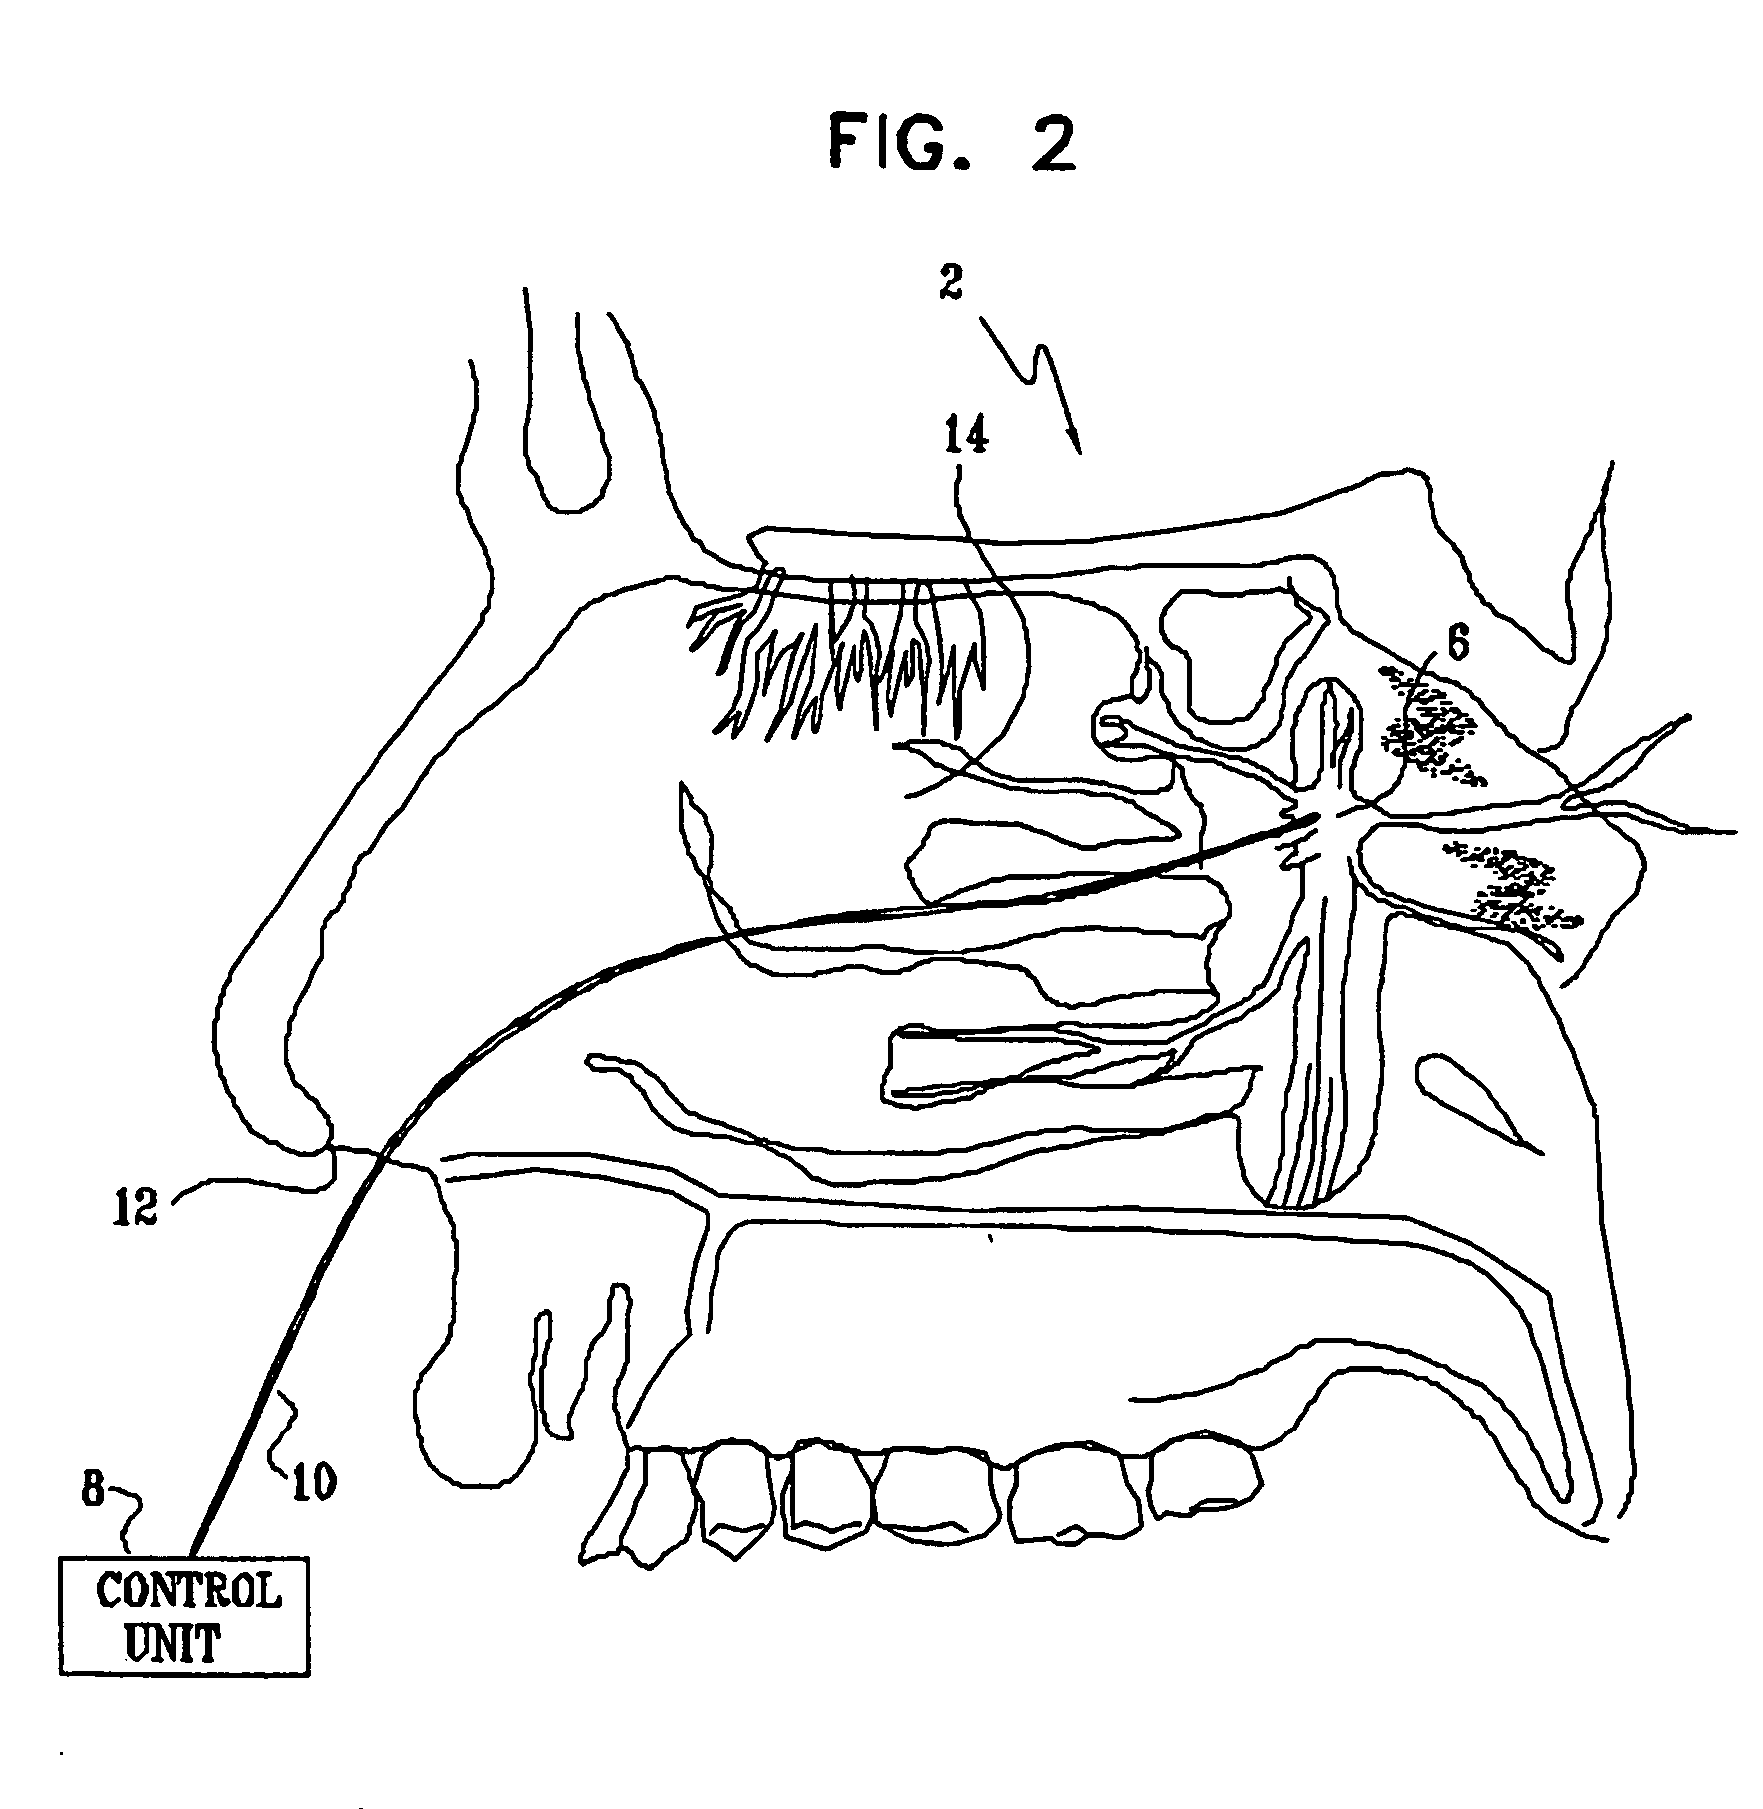 Methods and apparatus for modifying properties of the bbb and cerebral circulation by using the neuroexcitatory and/or neuroinhibitory effects of odorants on nerves in the head